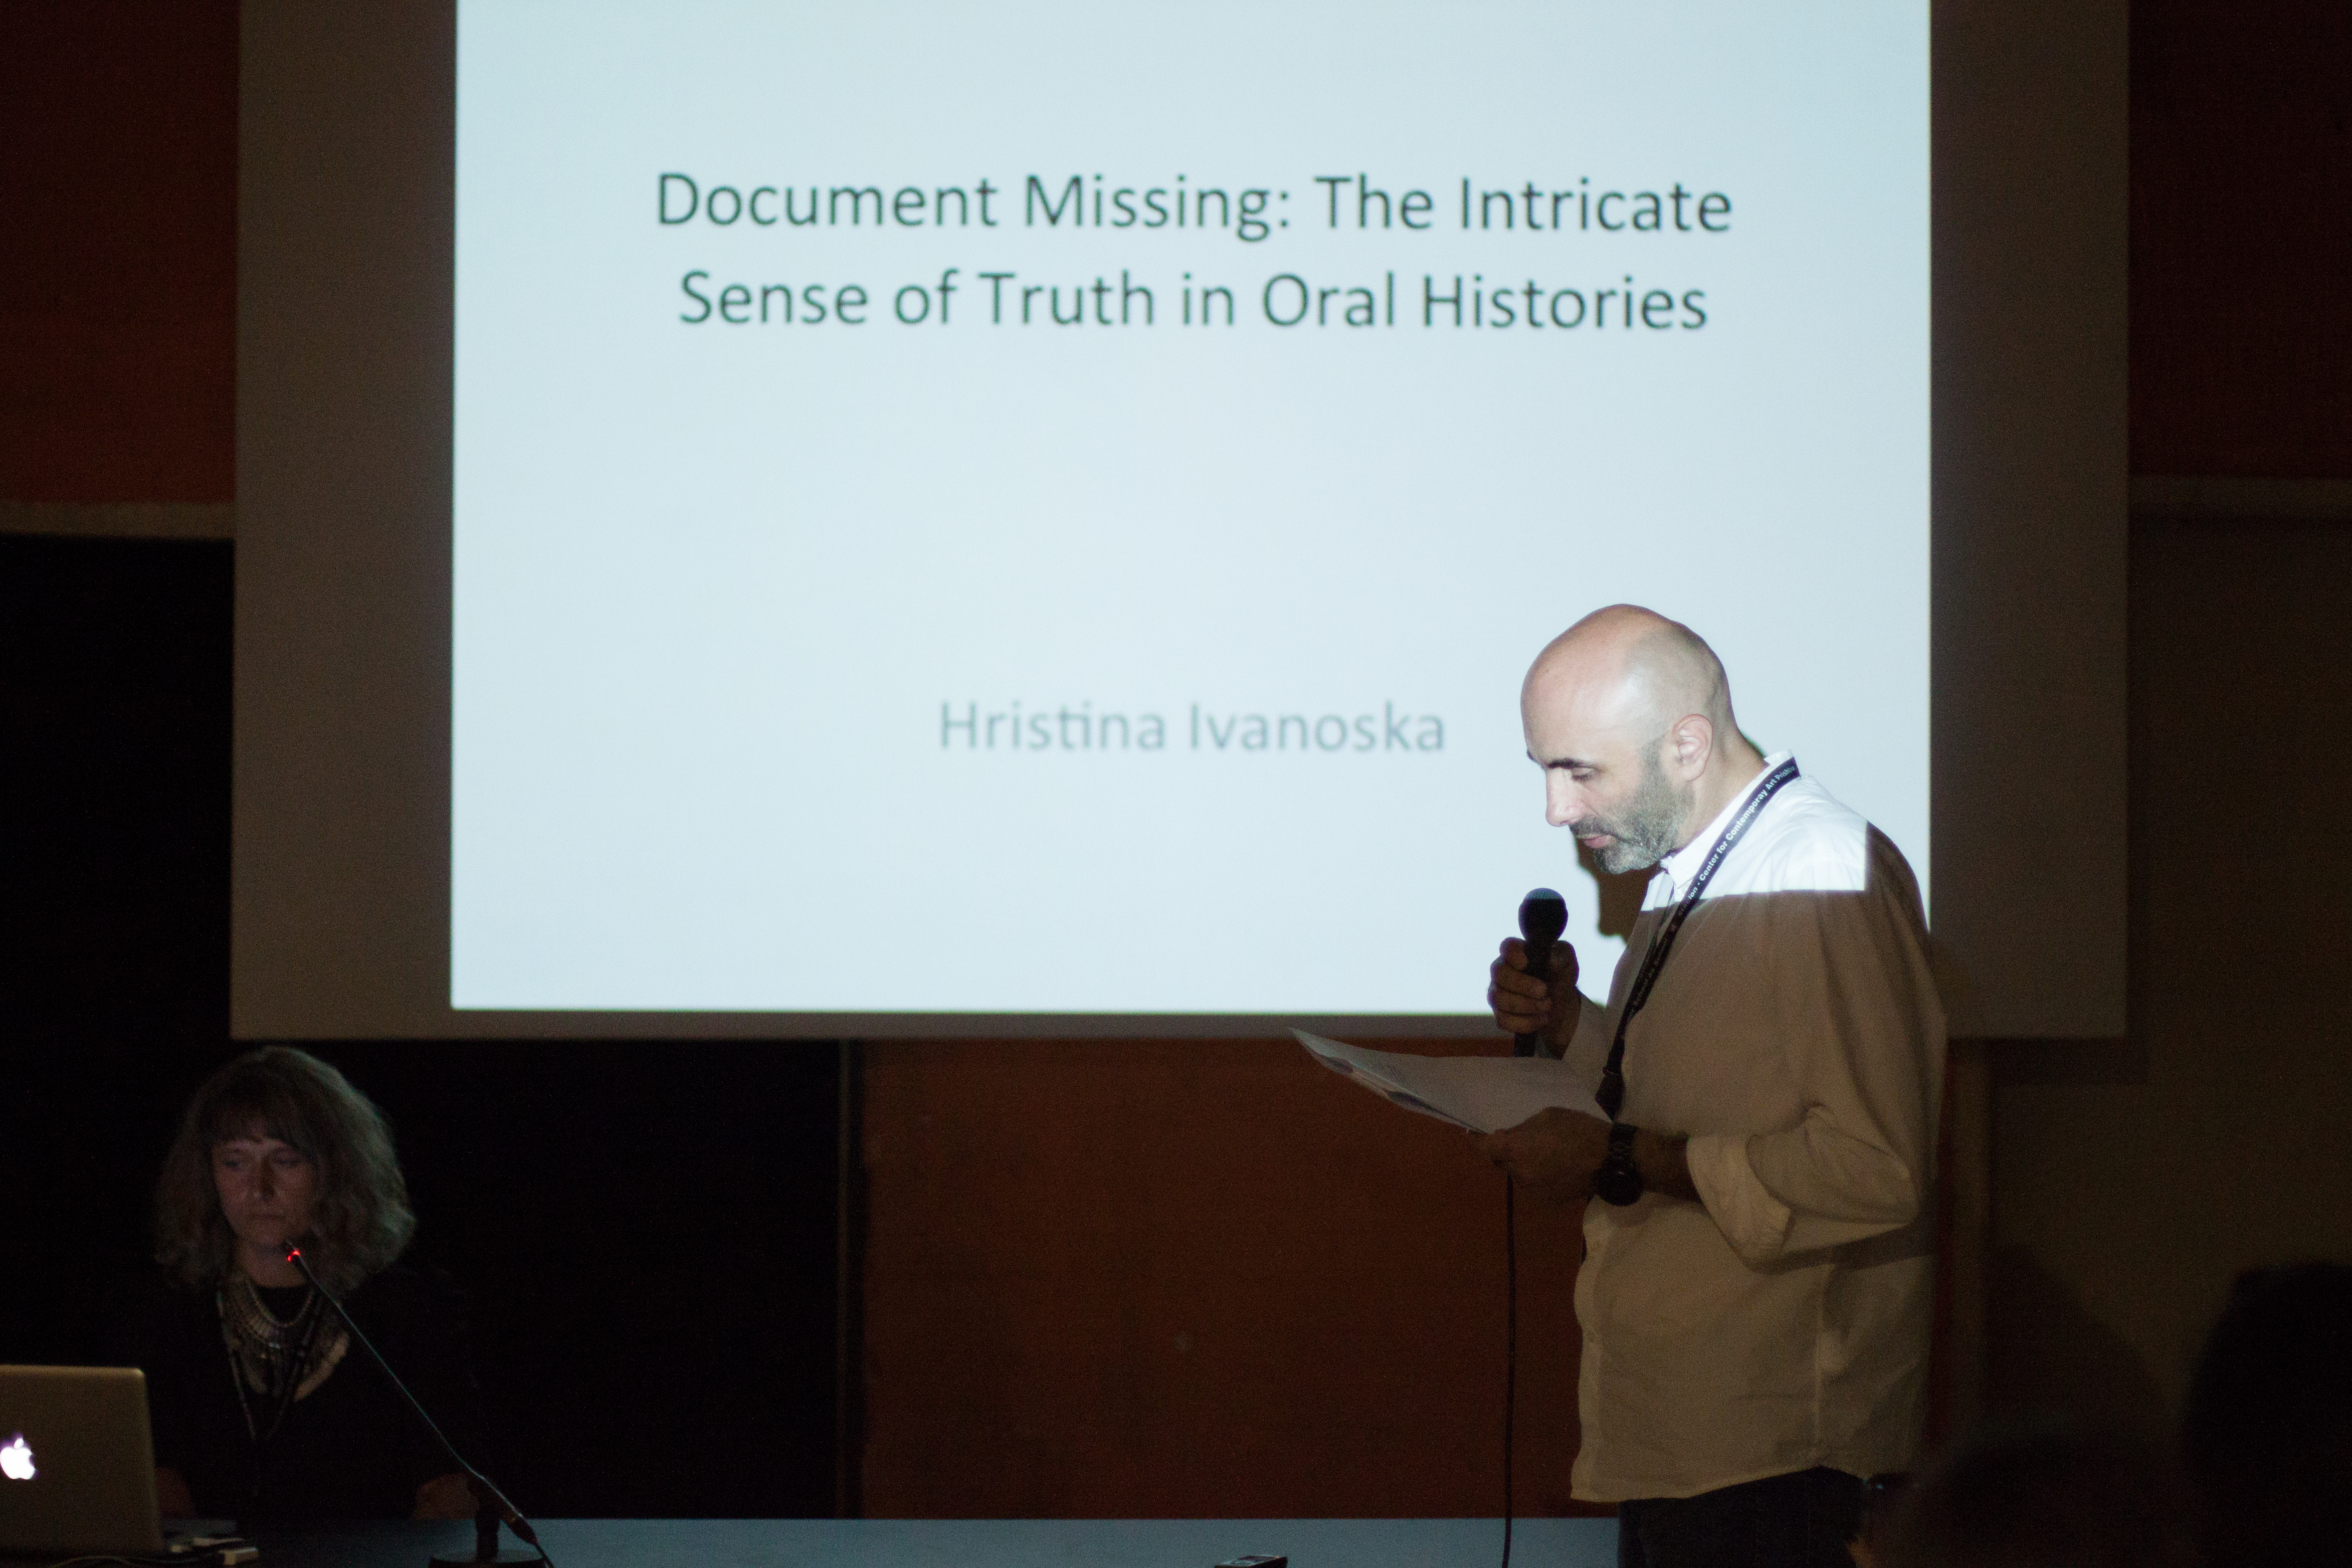 Hristina Ivanoska: The Intricate Sense of Truth in Oral Histories